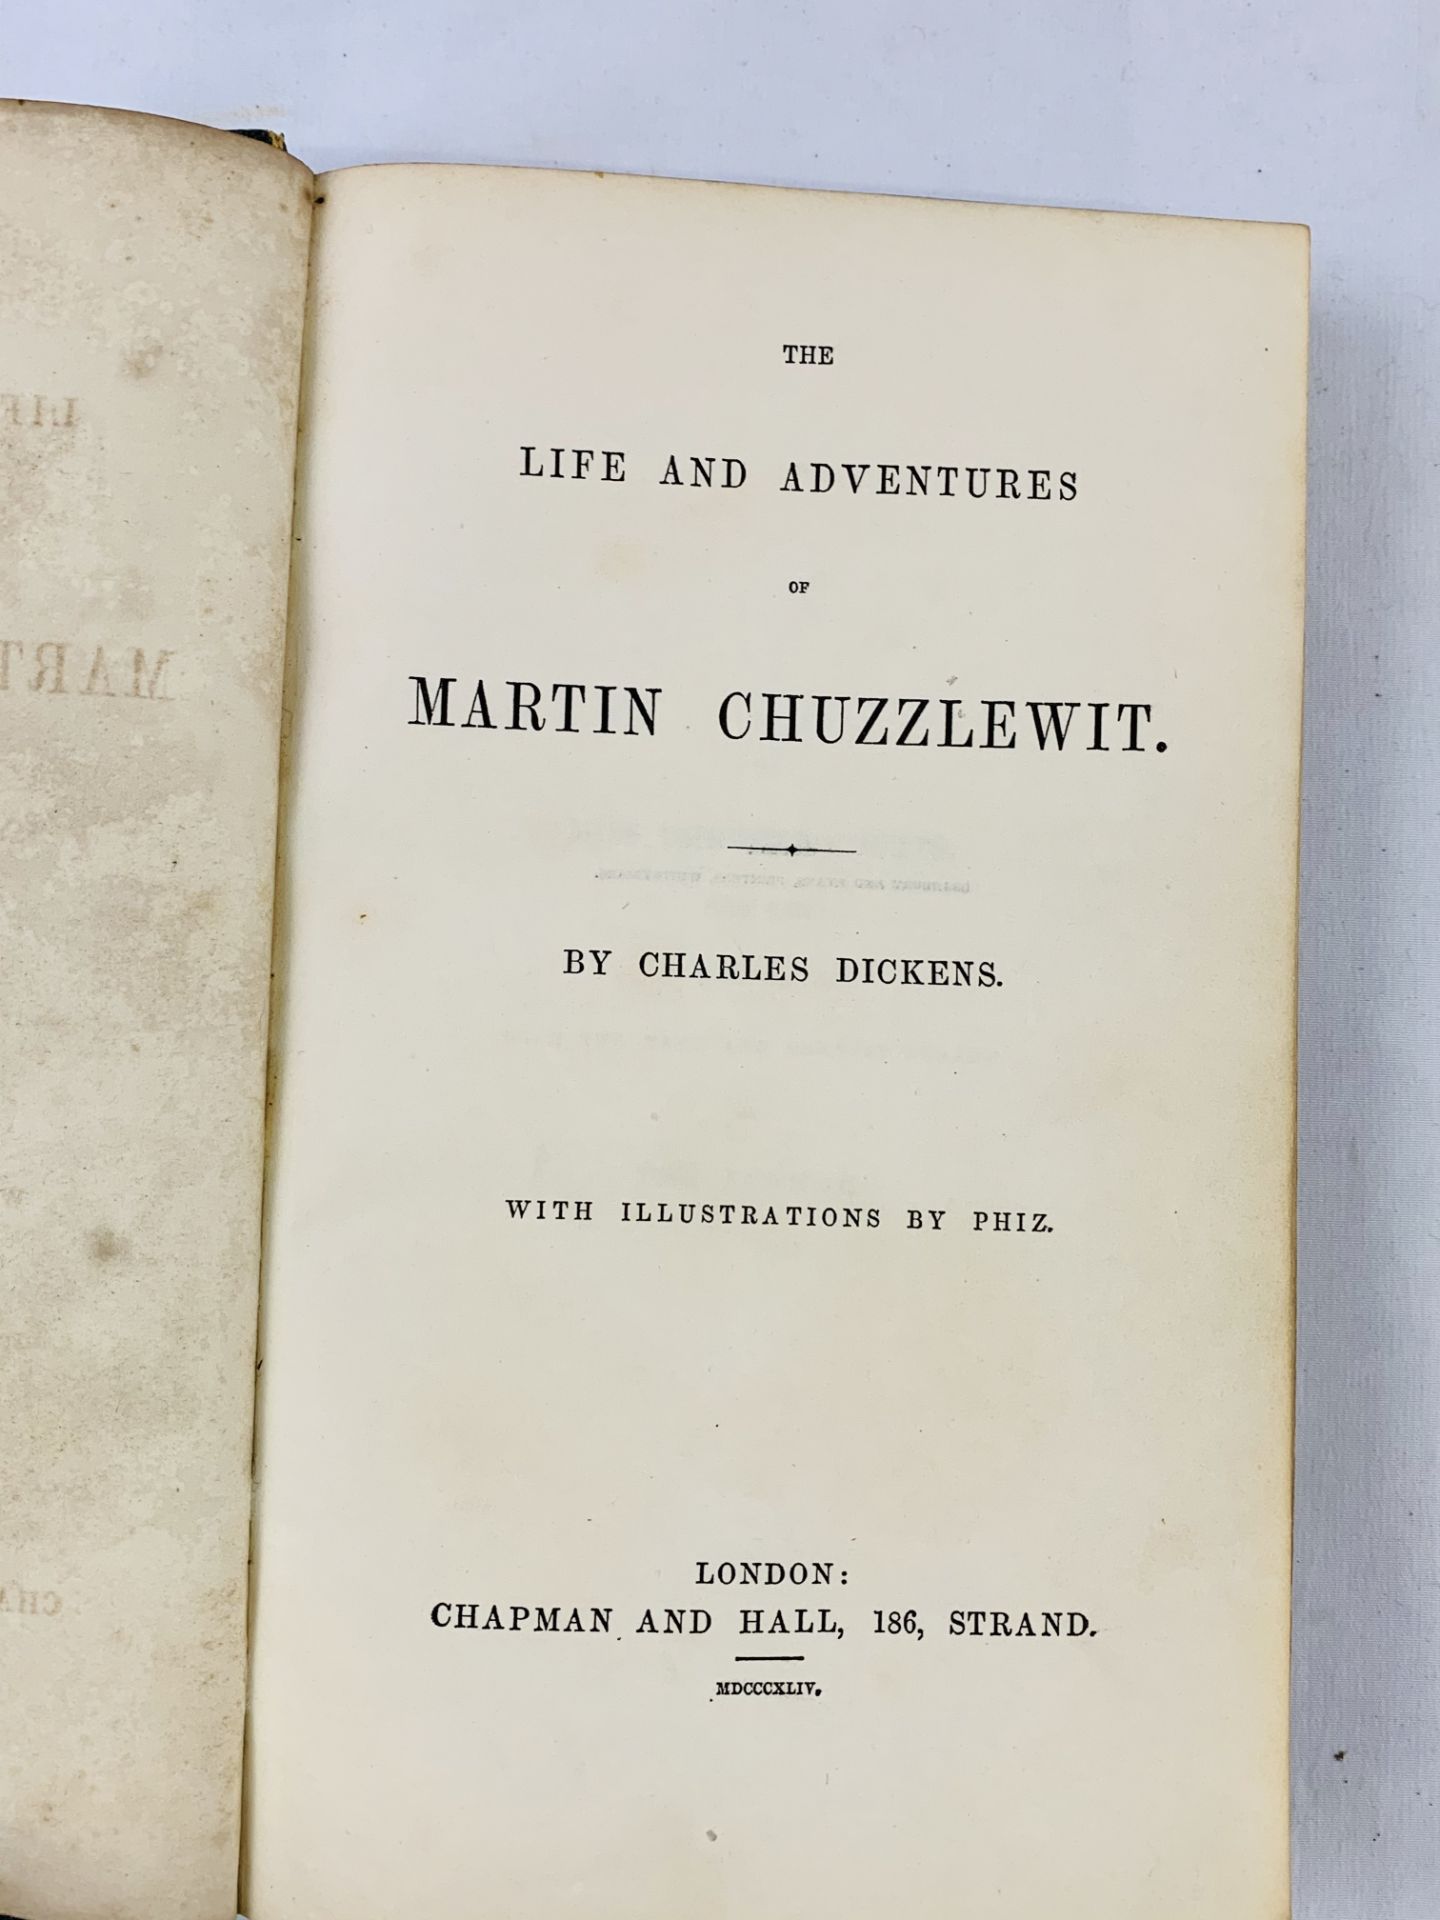 The Life and Adventures of Martin Chuzzlewit by Charles Dickens, Chapman & Hall 1844, 1st Edition. - Image 2 of 6